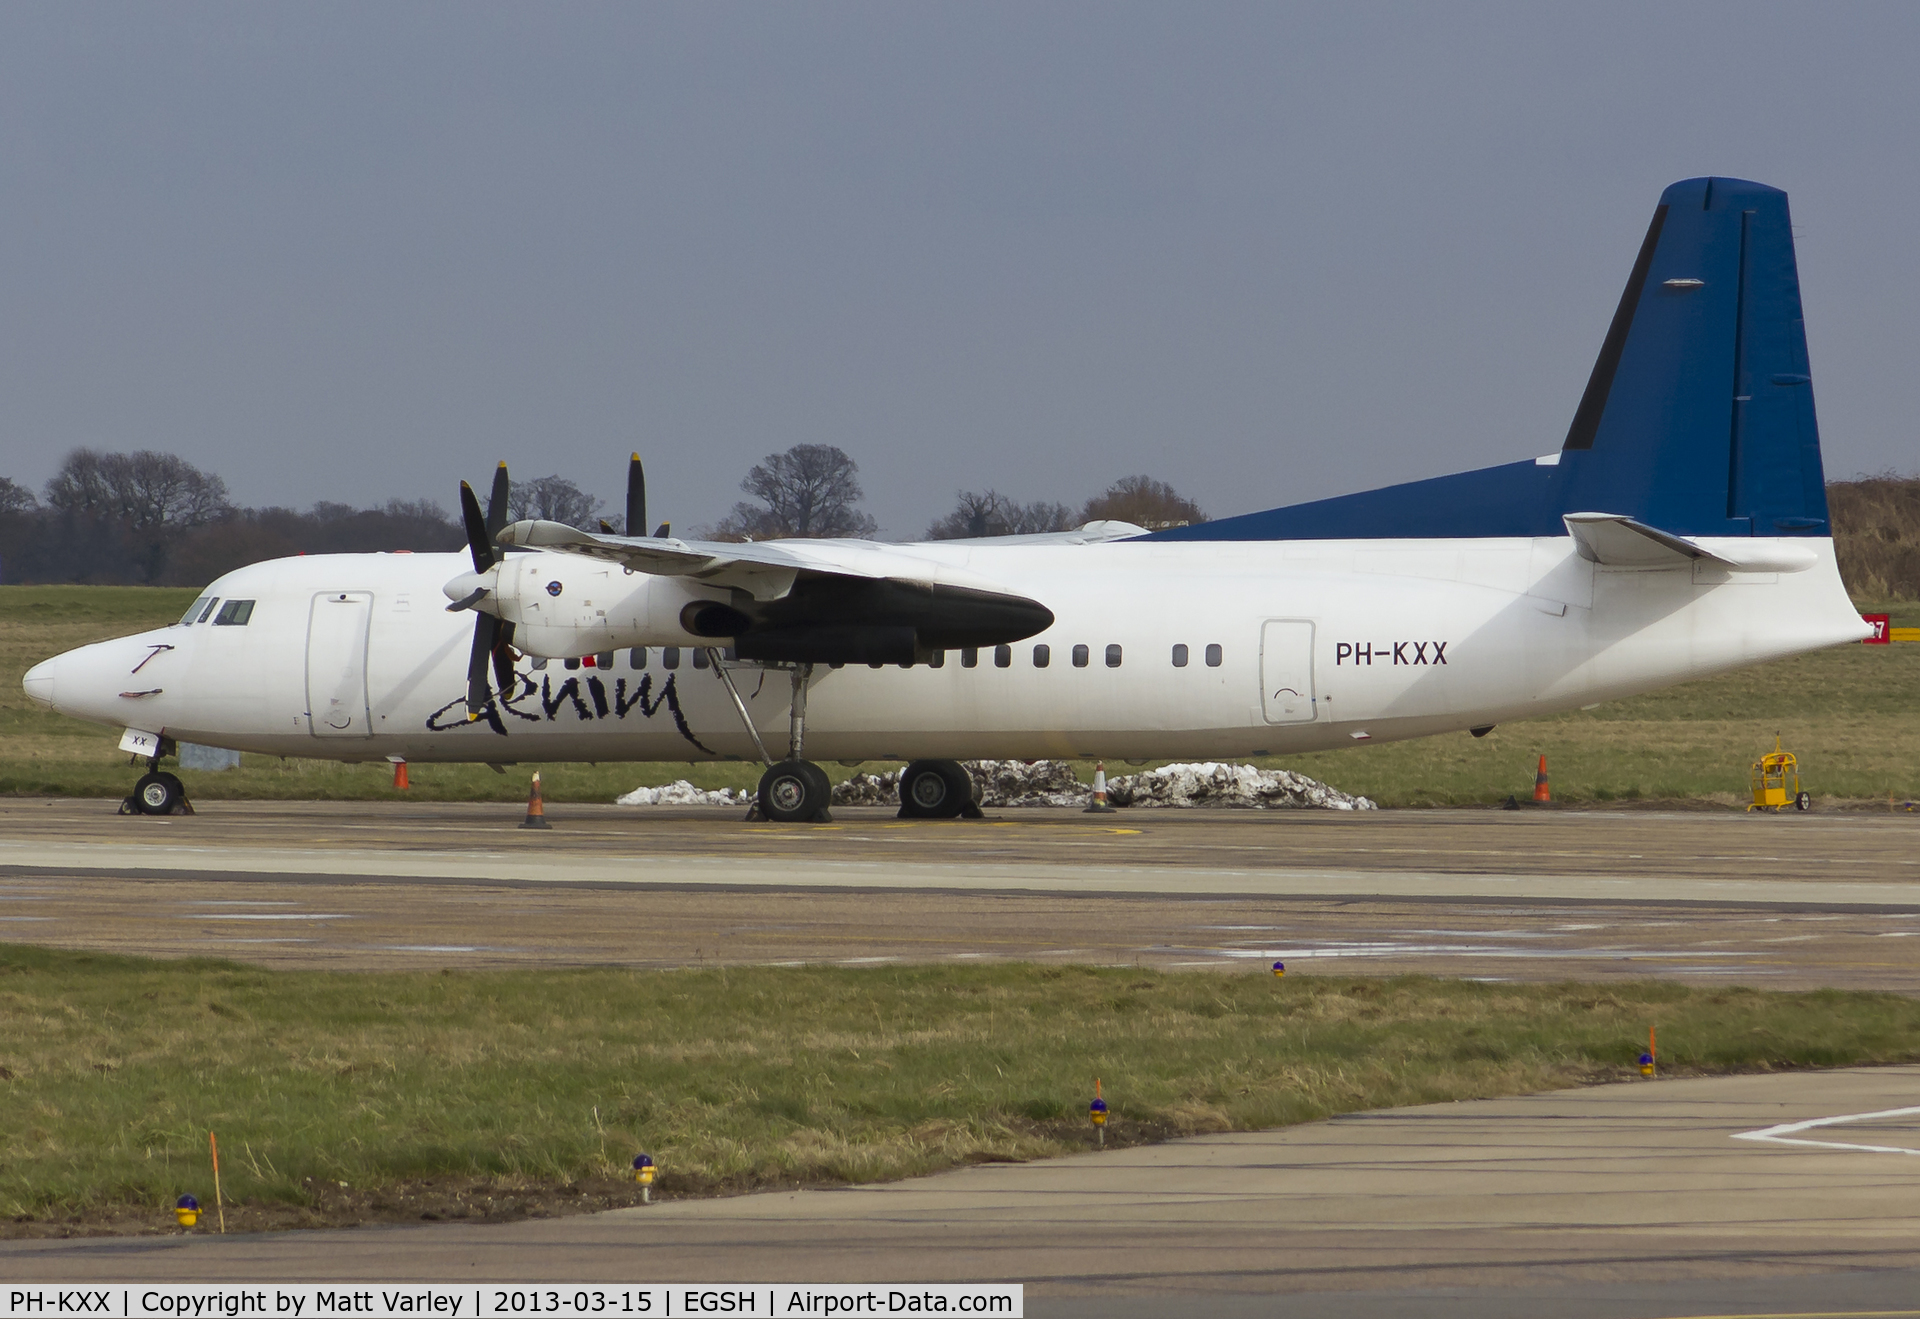 PH-KXX, 1992 Fokker 50 C/N 20262, Sat on stand.